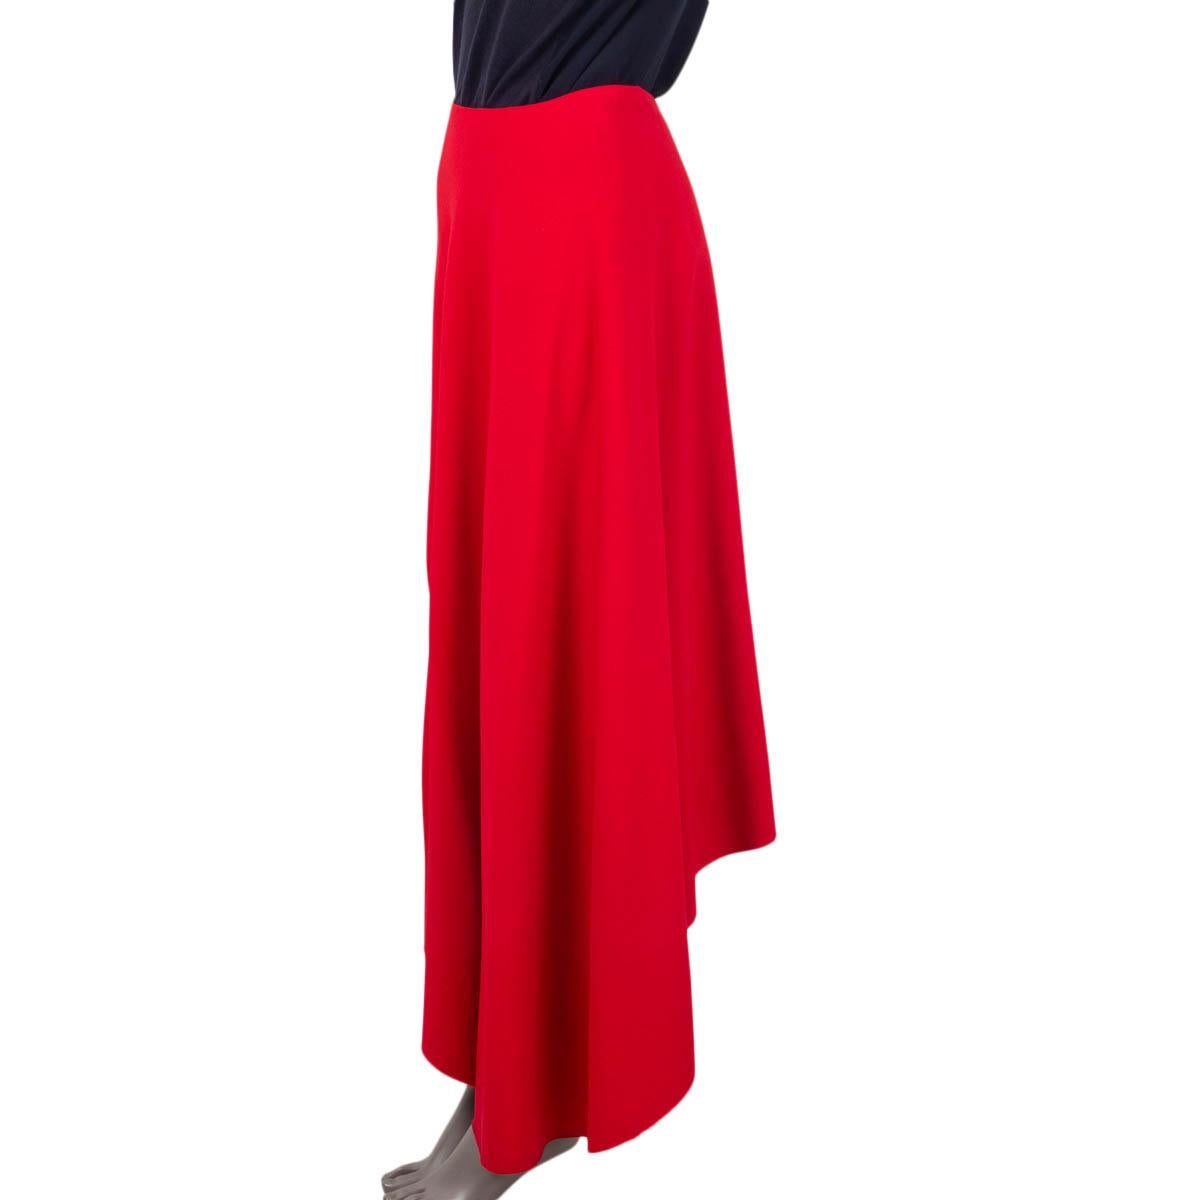 100% authentic Marni Fall 2015 stretch cady midi skirt in red viscose (59%), acetate (37%) and elastane (4%). Fall/winter 2015 collection. Features a asymmetric deconstructed hemline. Opens with a concealed zipper and a hook on the side. Unlined.